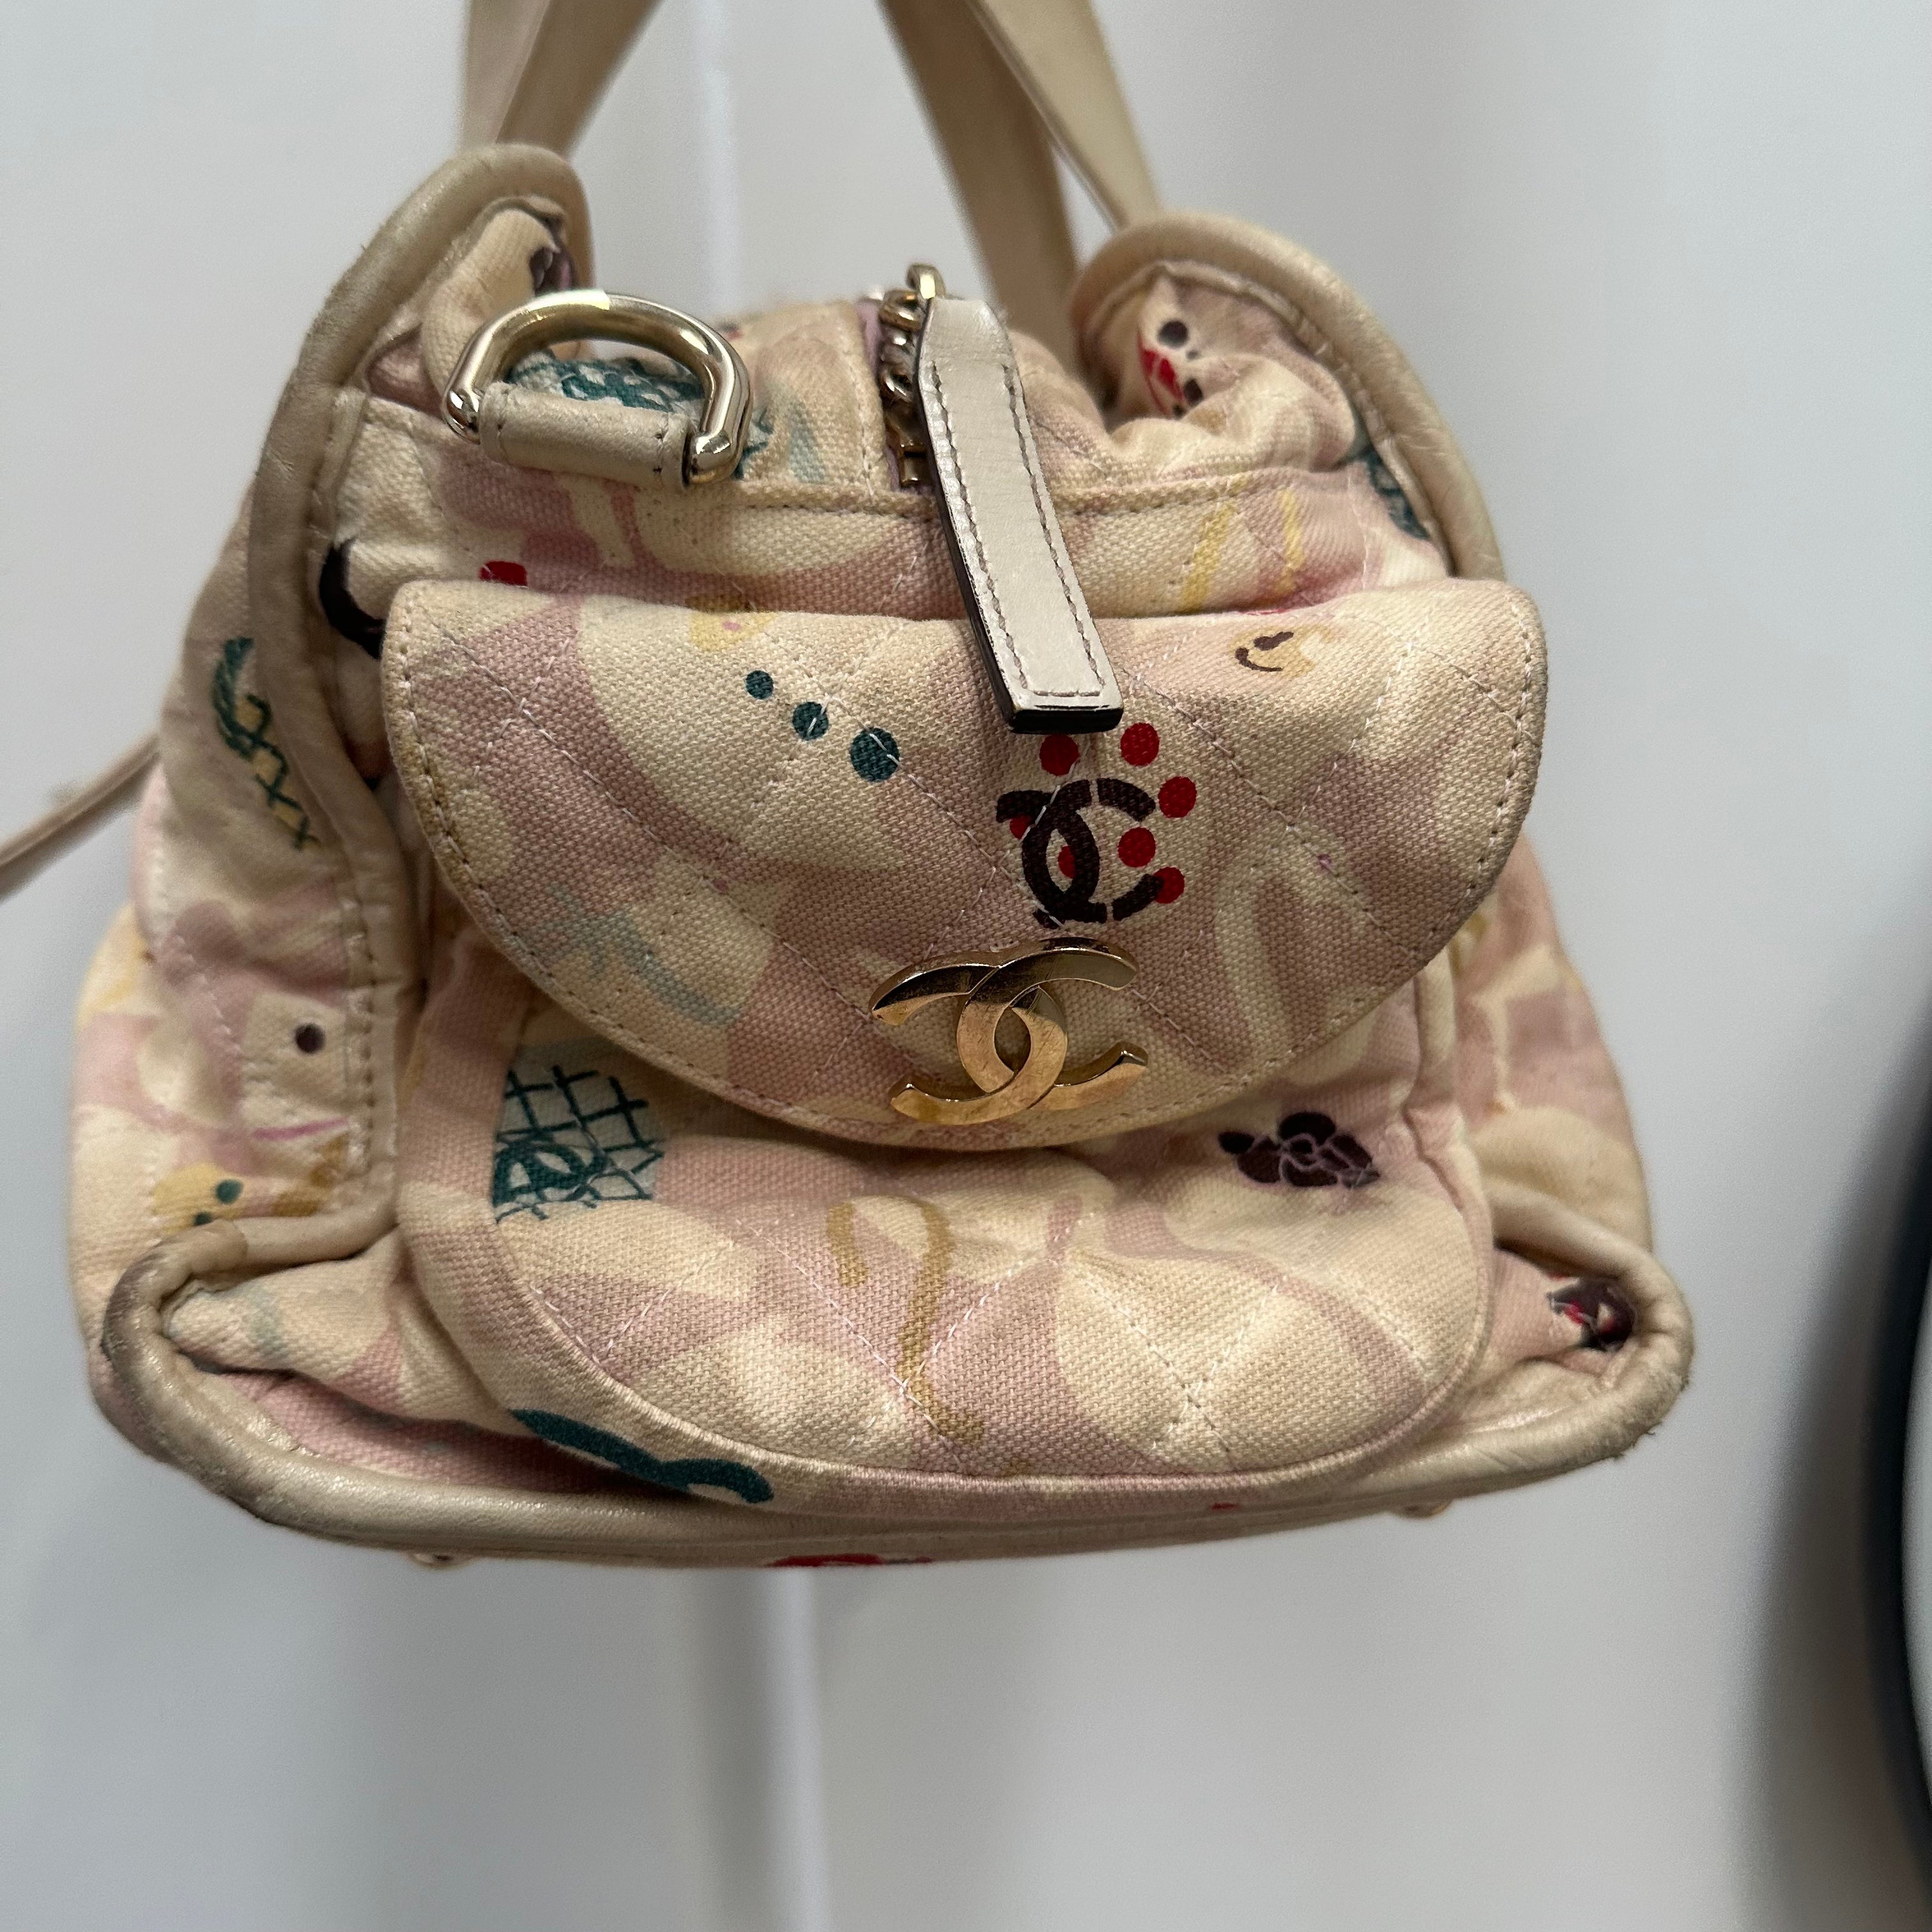 Chanel Printed Baby Animals Canvas Bag with Gold Hardware